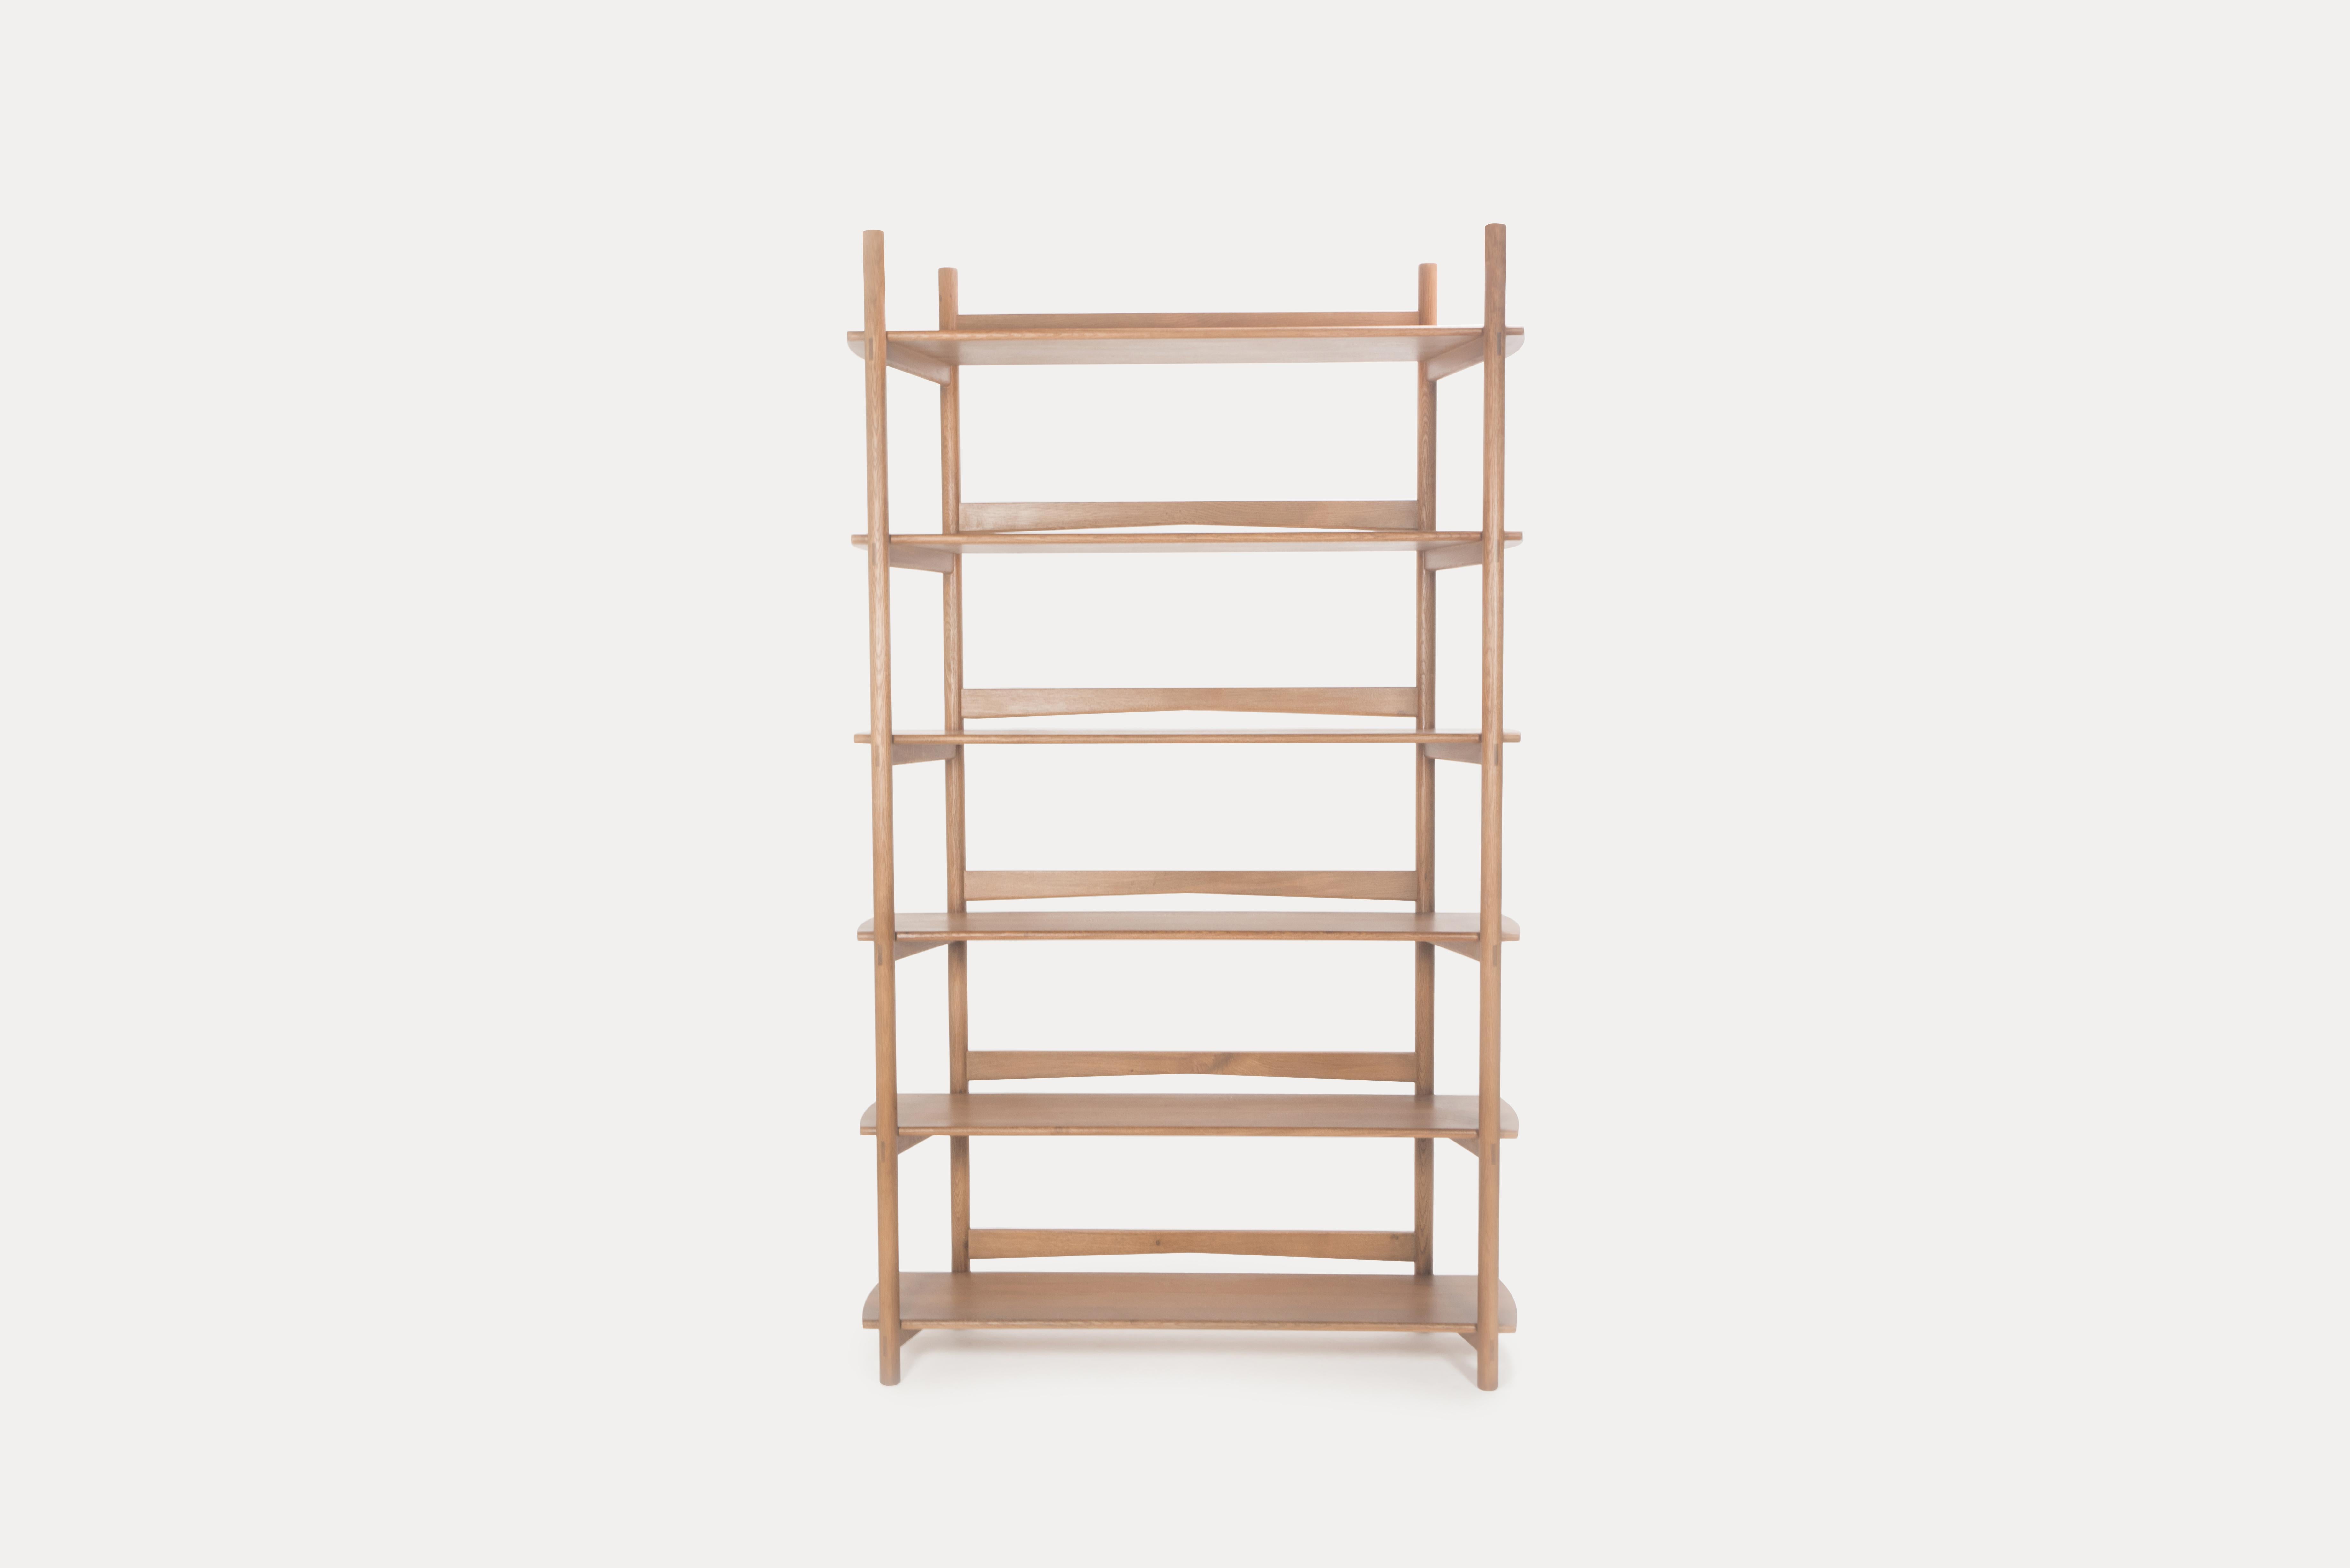 Joinery Mora Bookcase by Sun at Six, Sienna, Minimalist Bookcase in Oak Wood